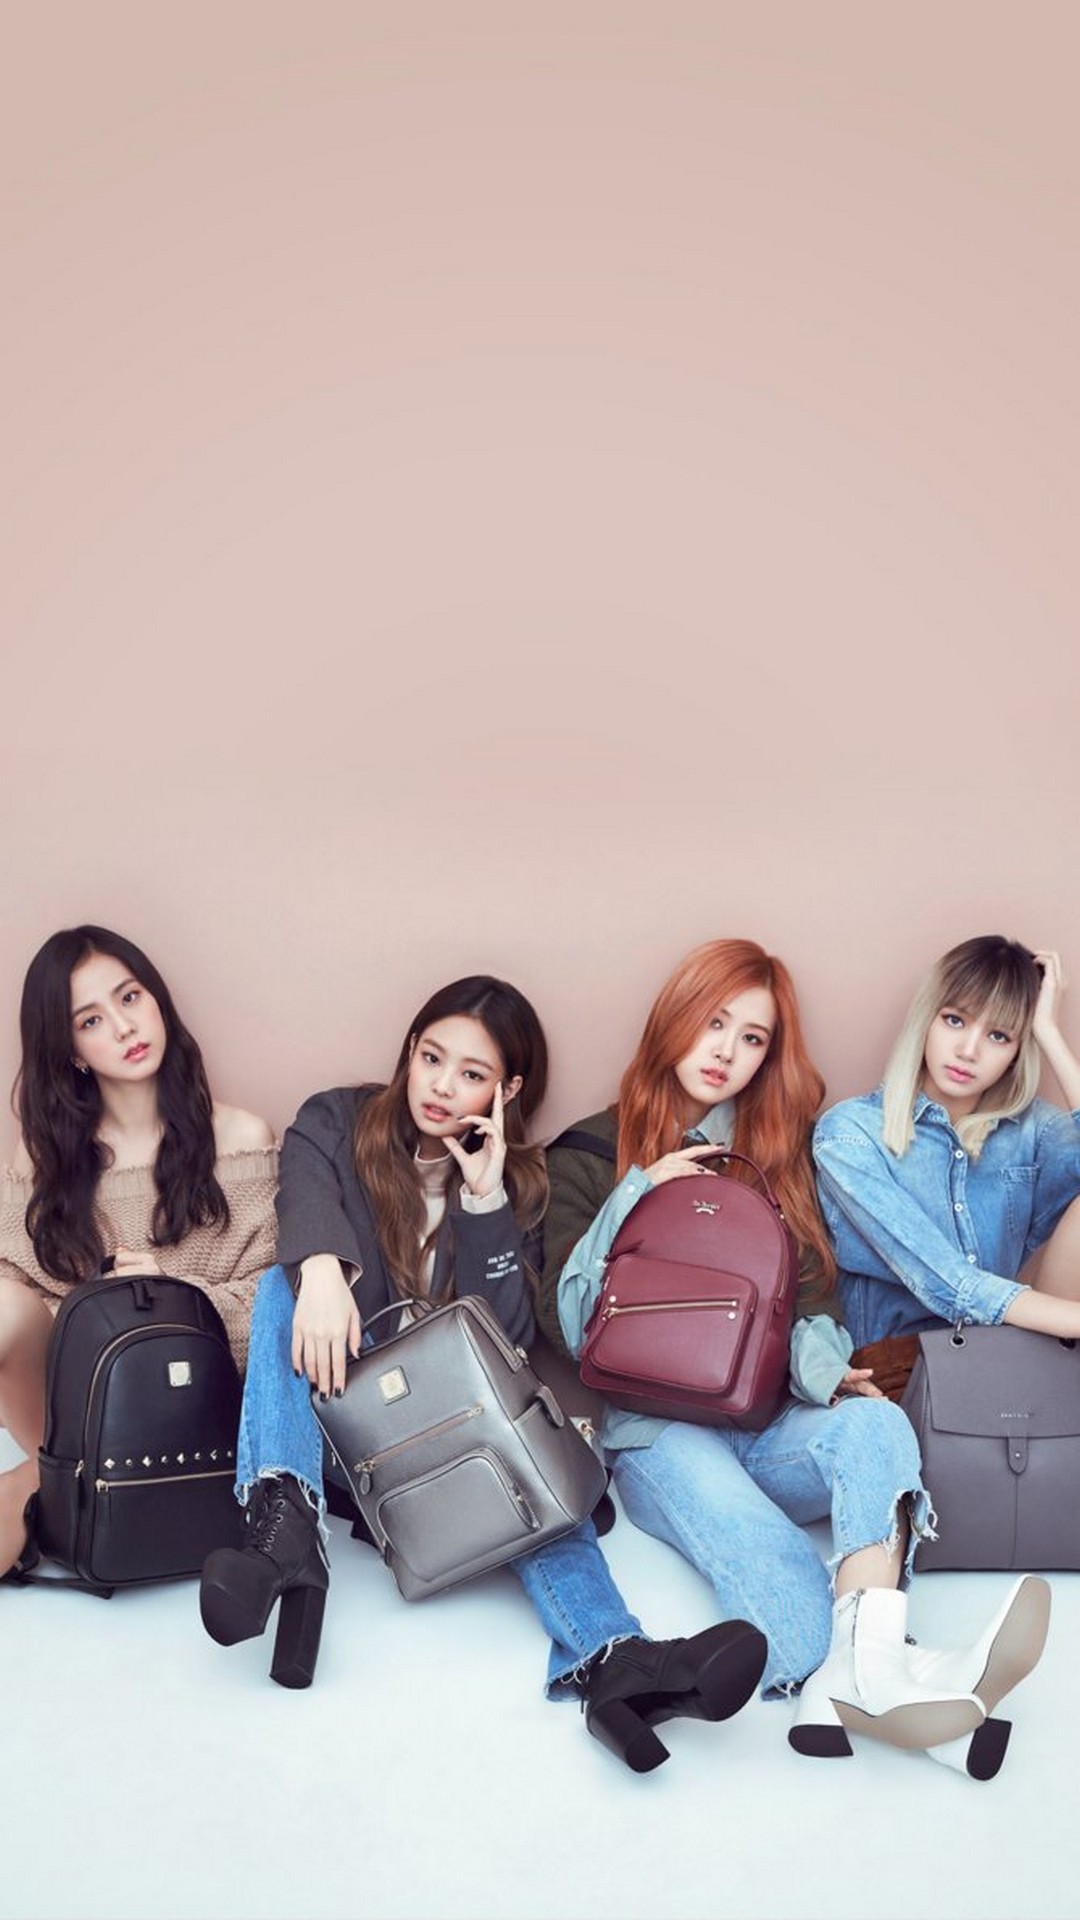 K-POP Blackpink iPhone X Wallpaper HD with high-resolution 1080x1920 pixel. Download all Mobile Wallpapers and Use them as wallpapers for your iPhone, Tablet, iPad, Android and other mobile devices